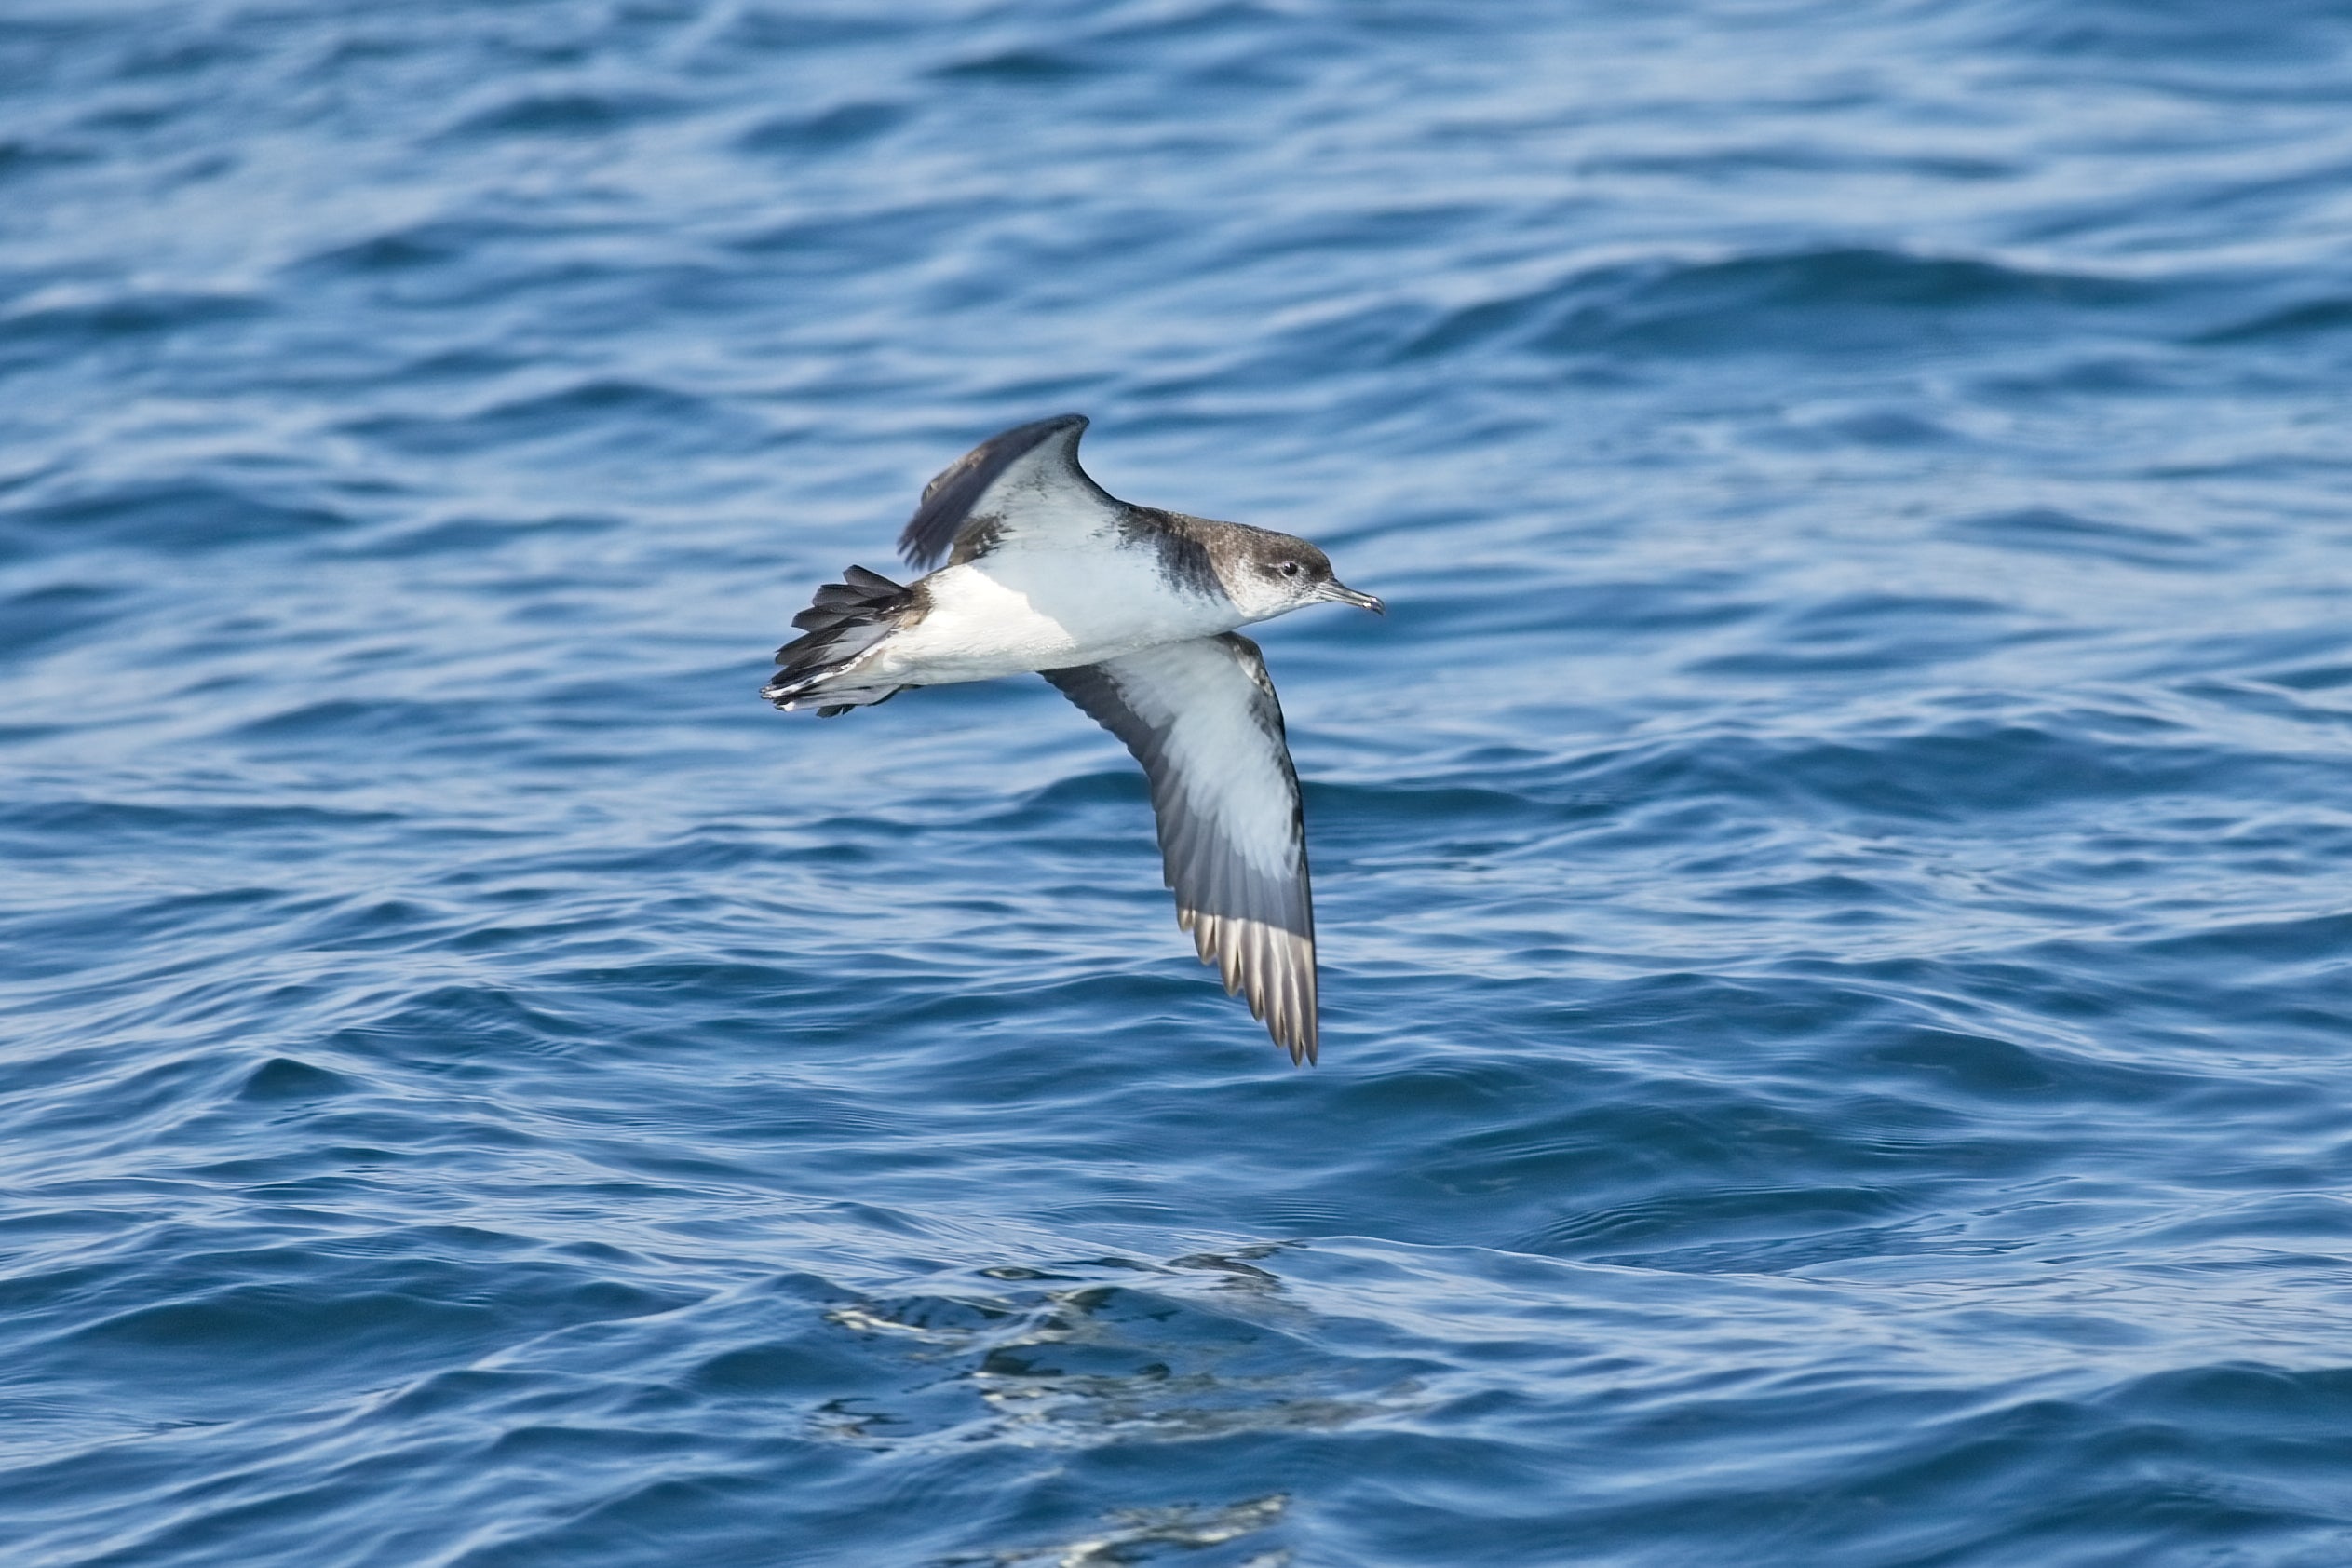 Seabirds exposed to oil are more likely to become waterlogged, cold, and less buoyant